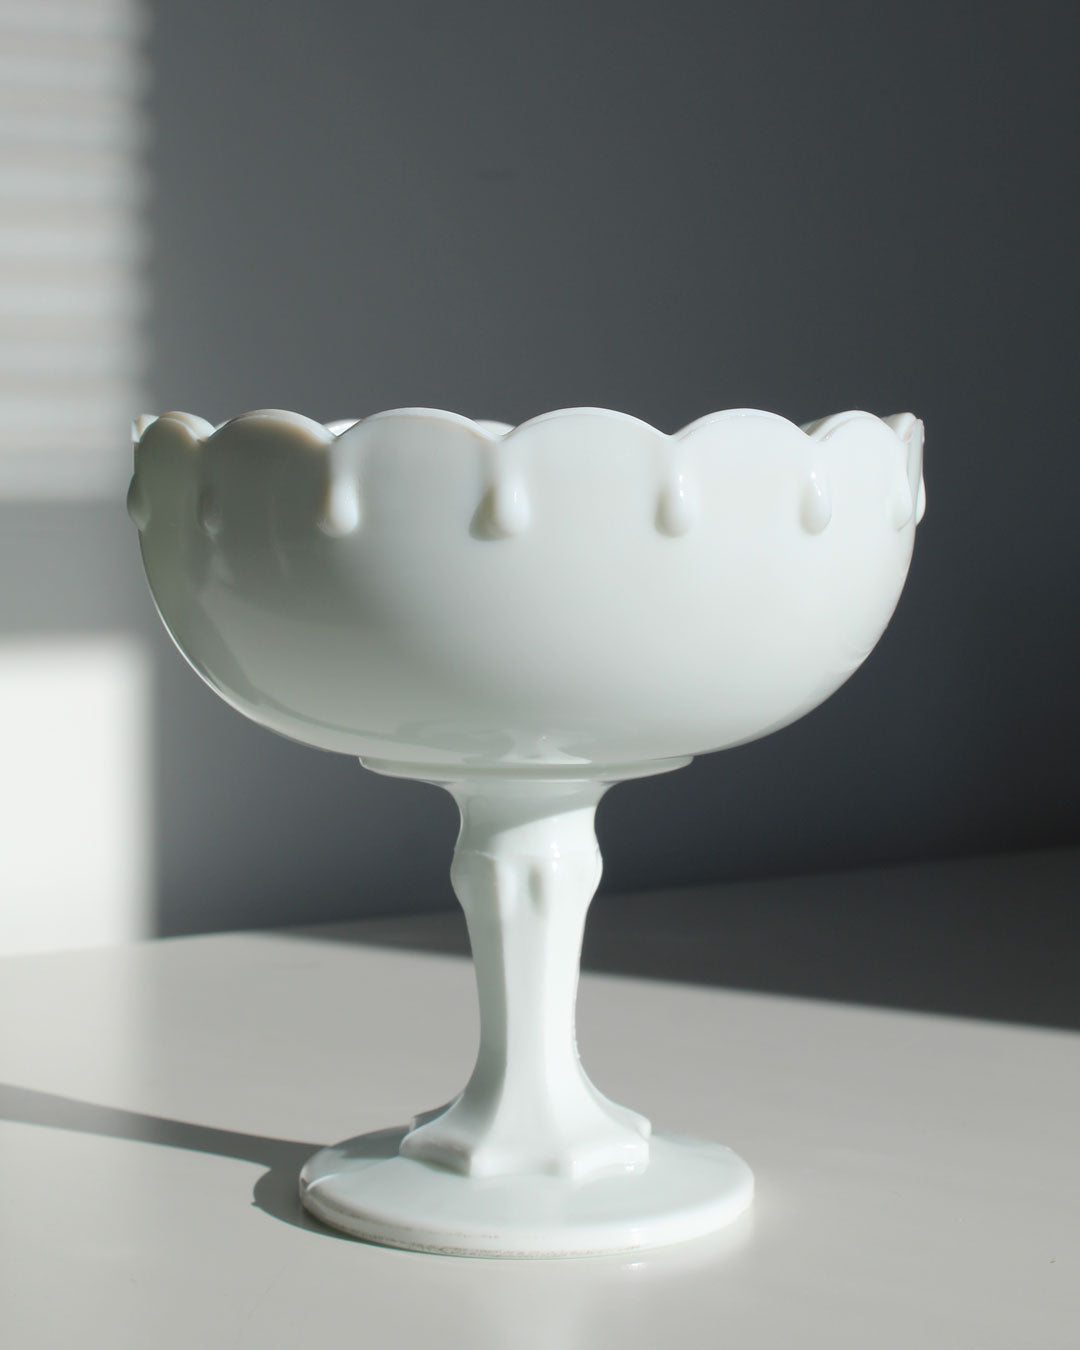 Vintage Milk Glass Candy Dish available at Lahn.shop